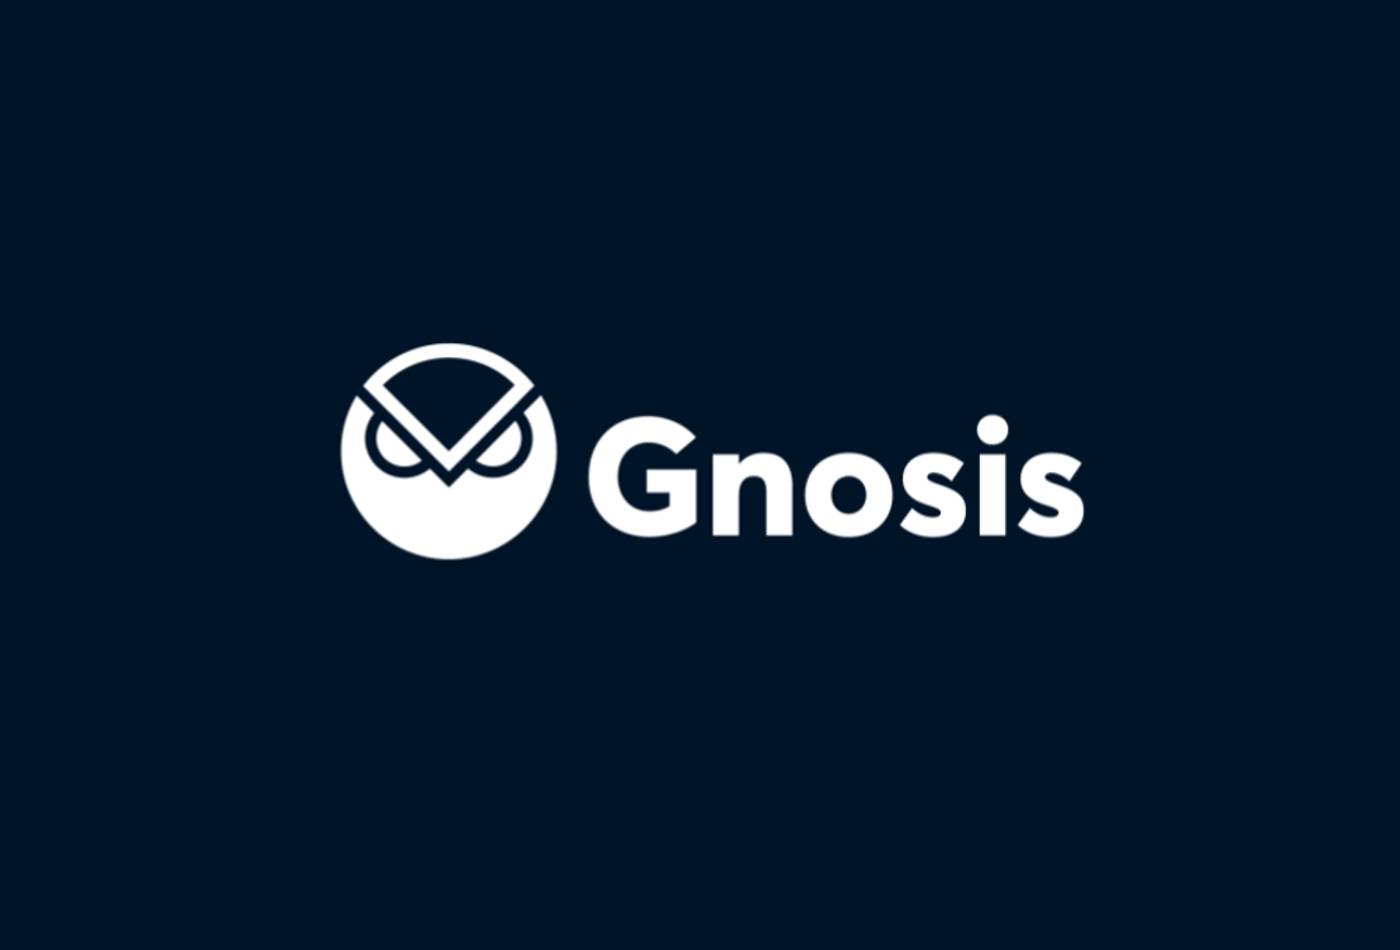 Gnosis (GNO) Price Prediction 2022-2030: The Best Time To Buy